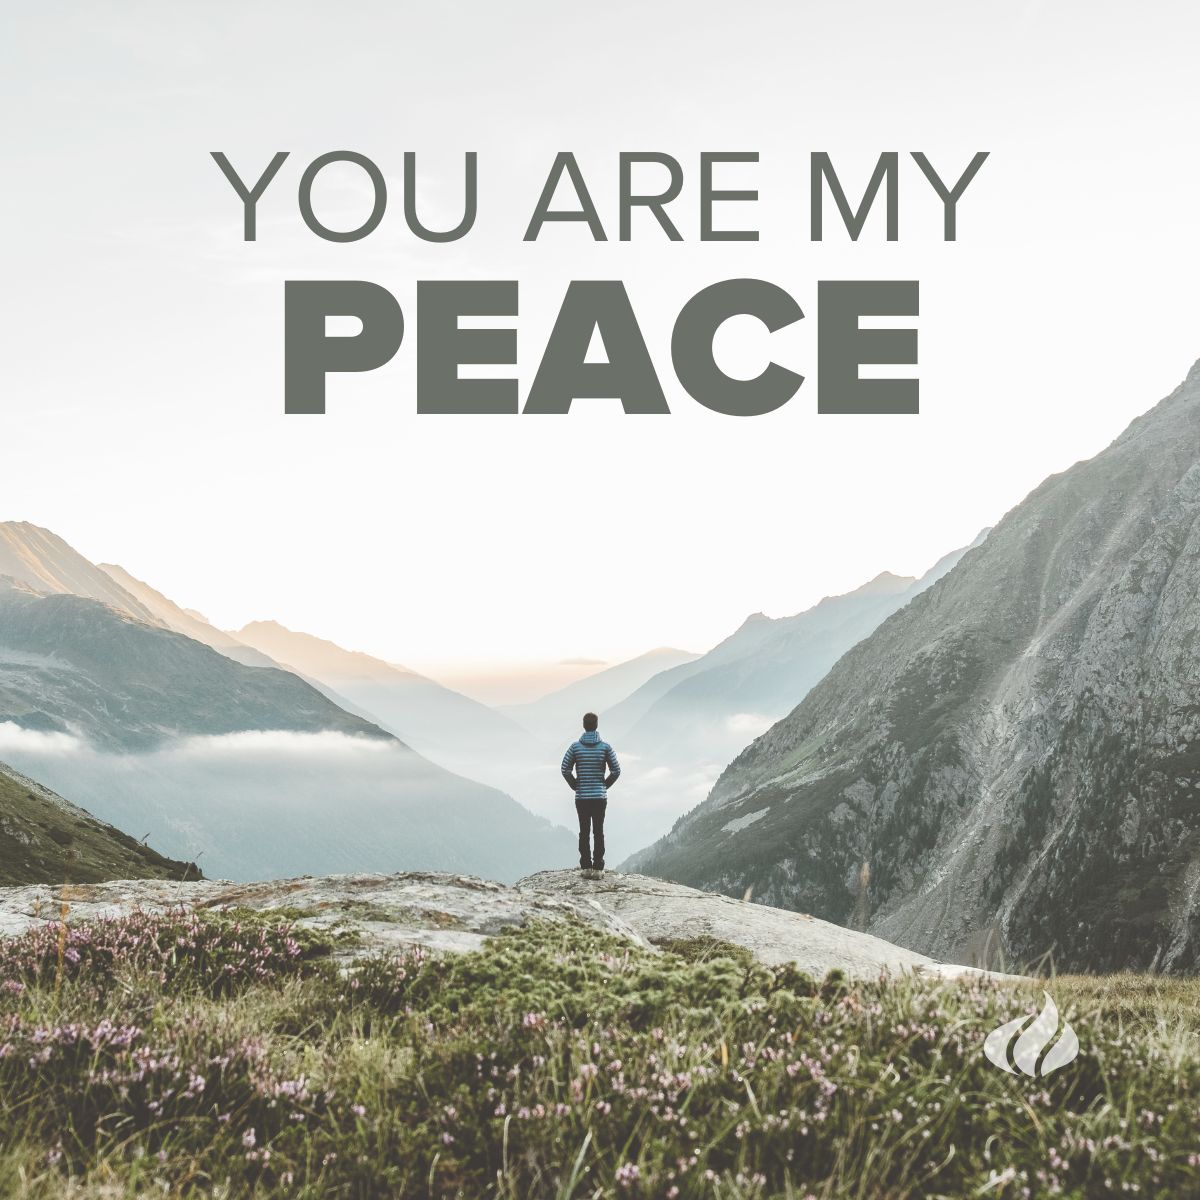 When the chaos of life seems to be all around you, know that God is the author of all peace, and in Him, we can find peace that goes beyond all understanding. If you're looking for peace today, take a moment to pray, be still before God, and let Him bring peace to your mind.